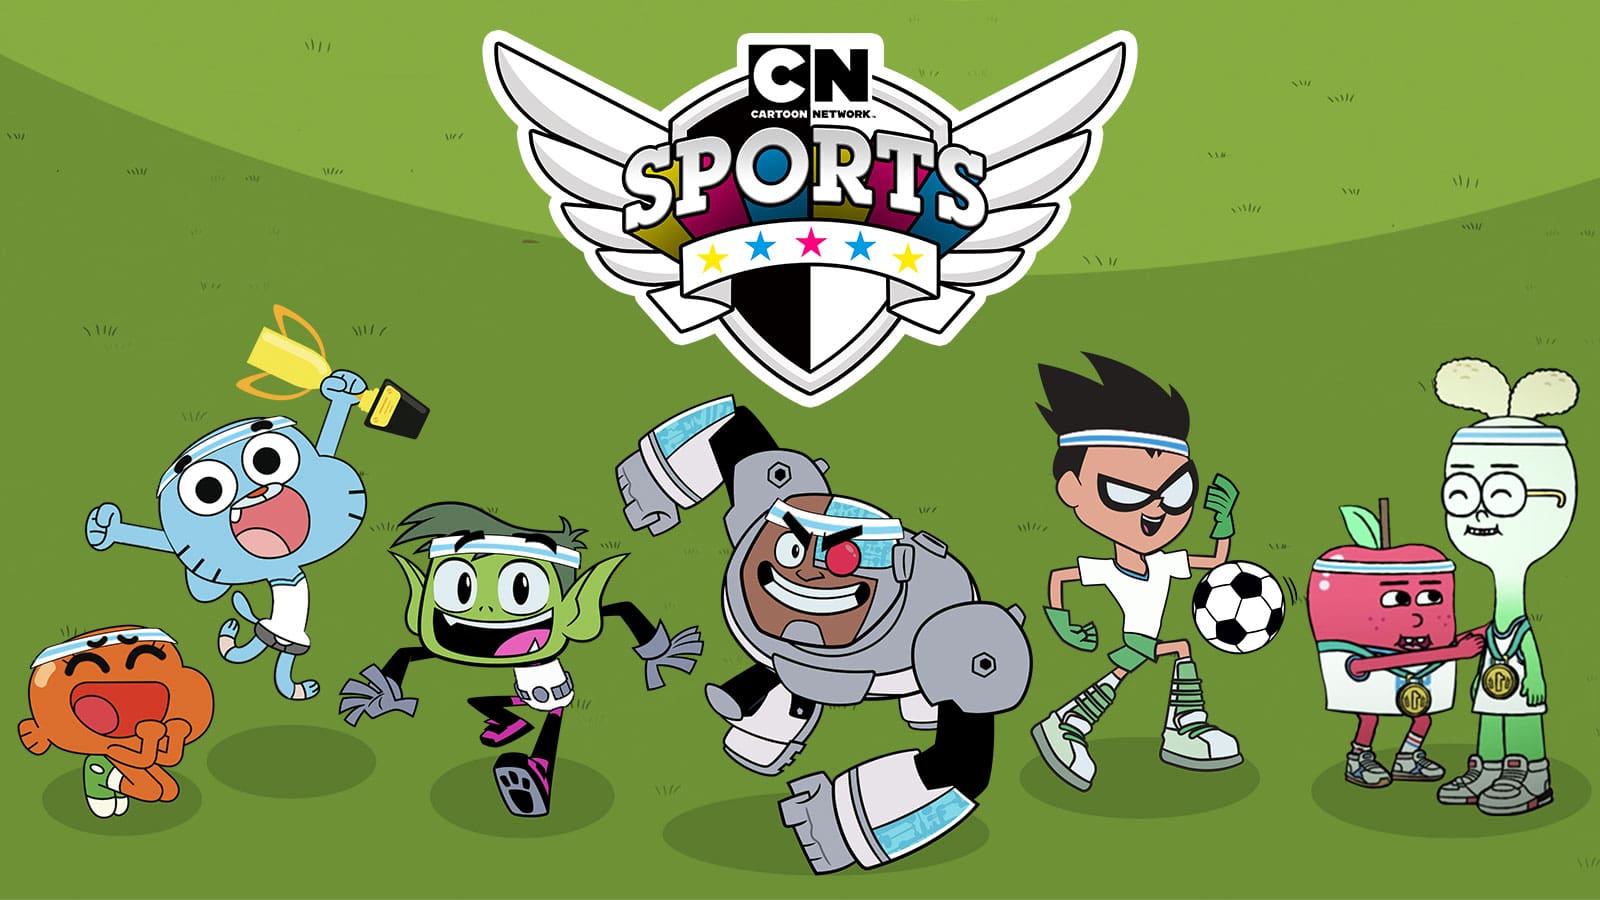 Win Prizes! | Cartoon Network UK Competitions